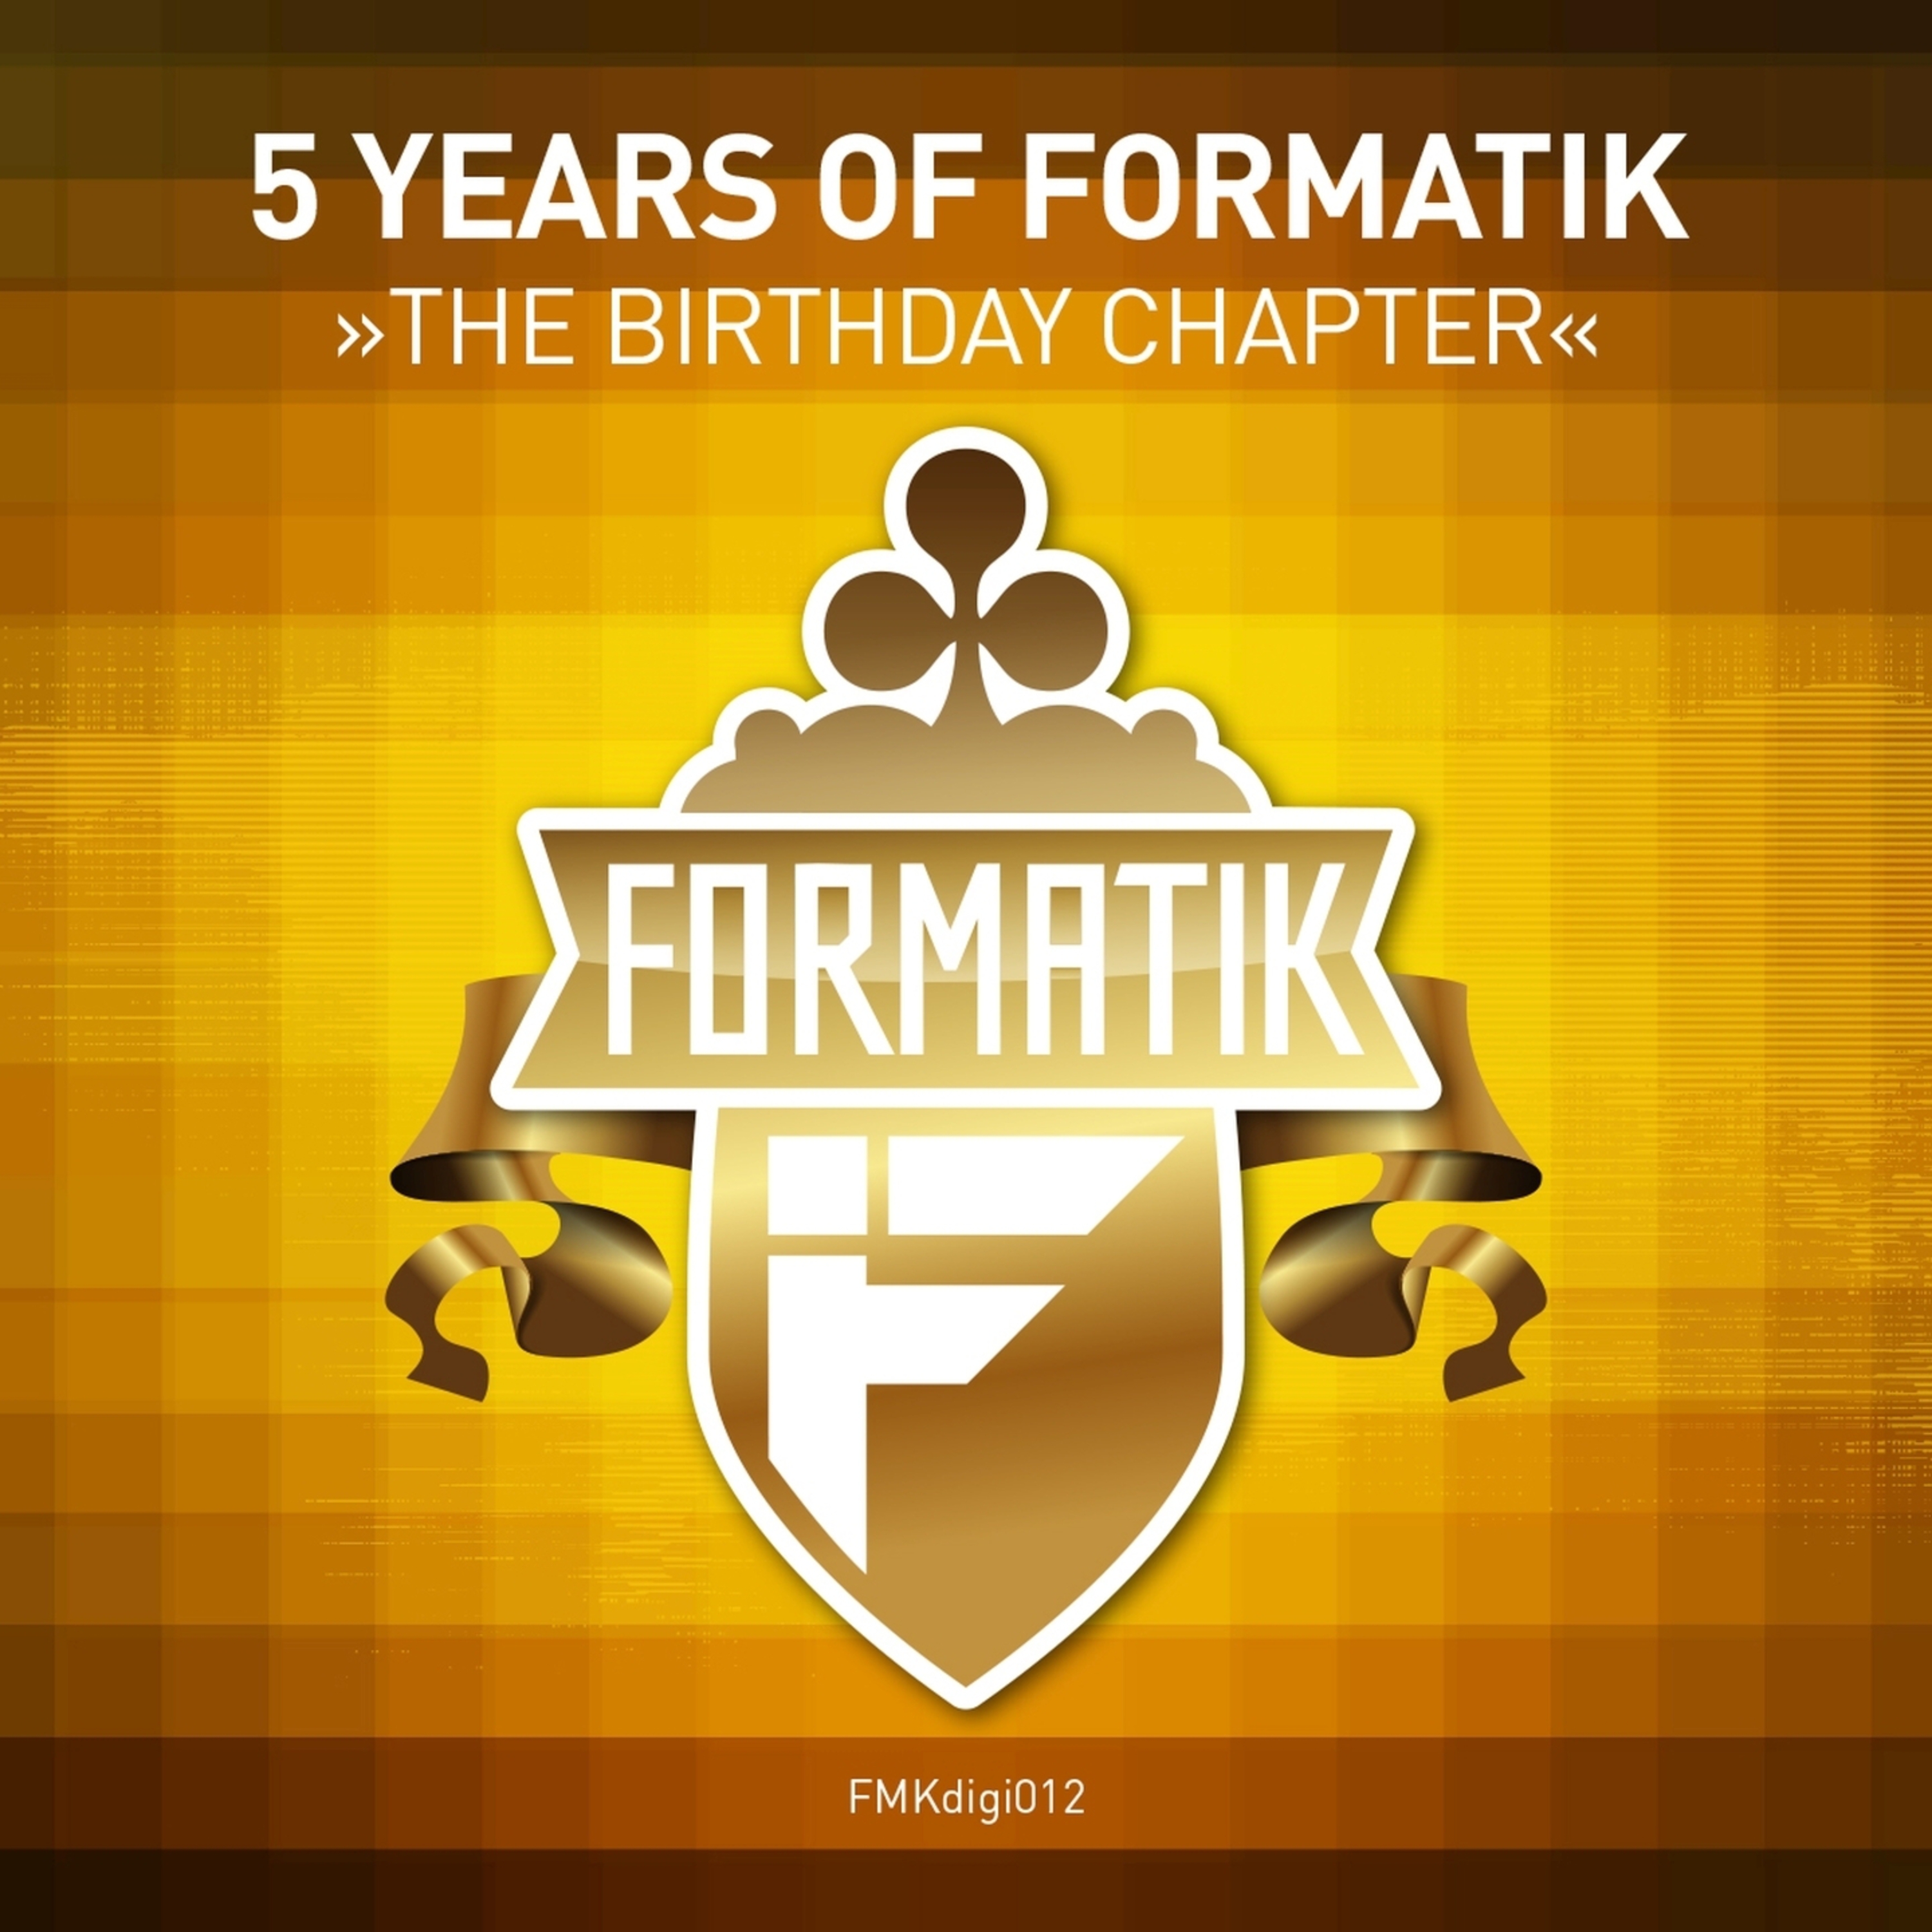 5 Years of Formatik - The Birthday Chapter